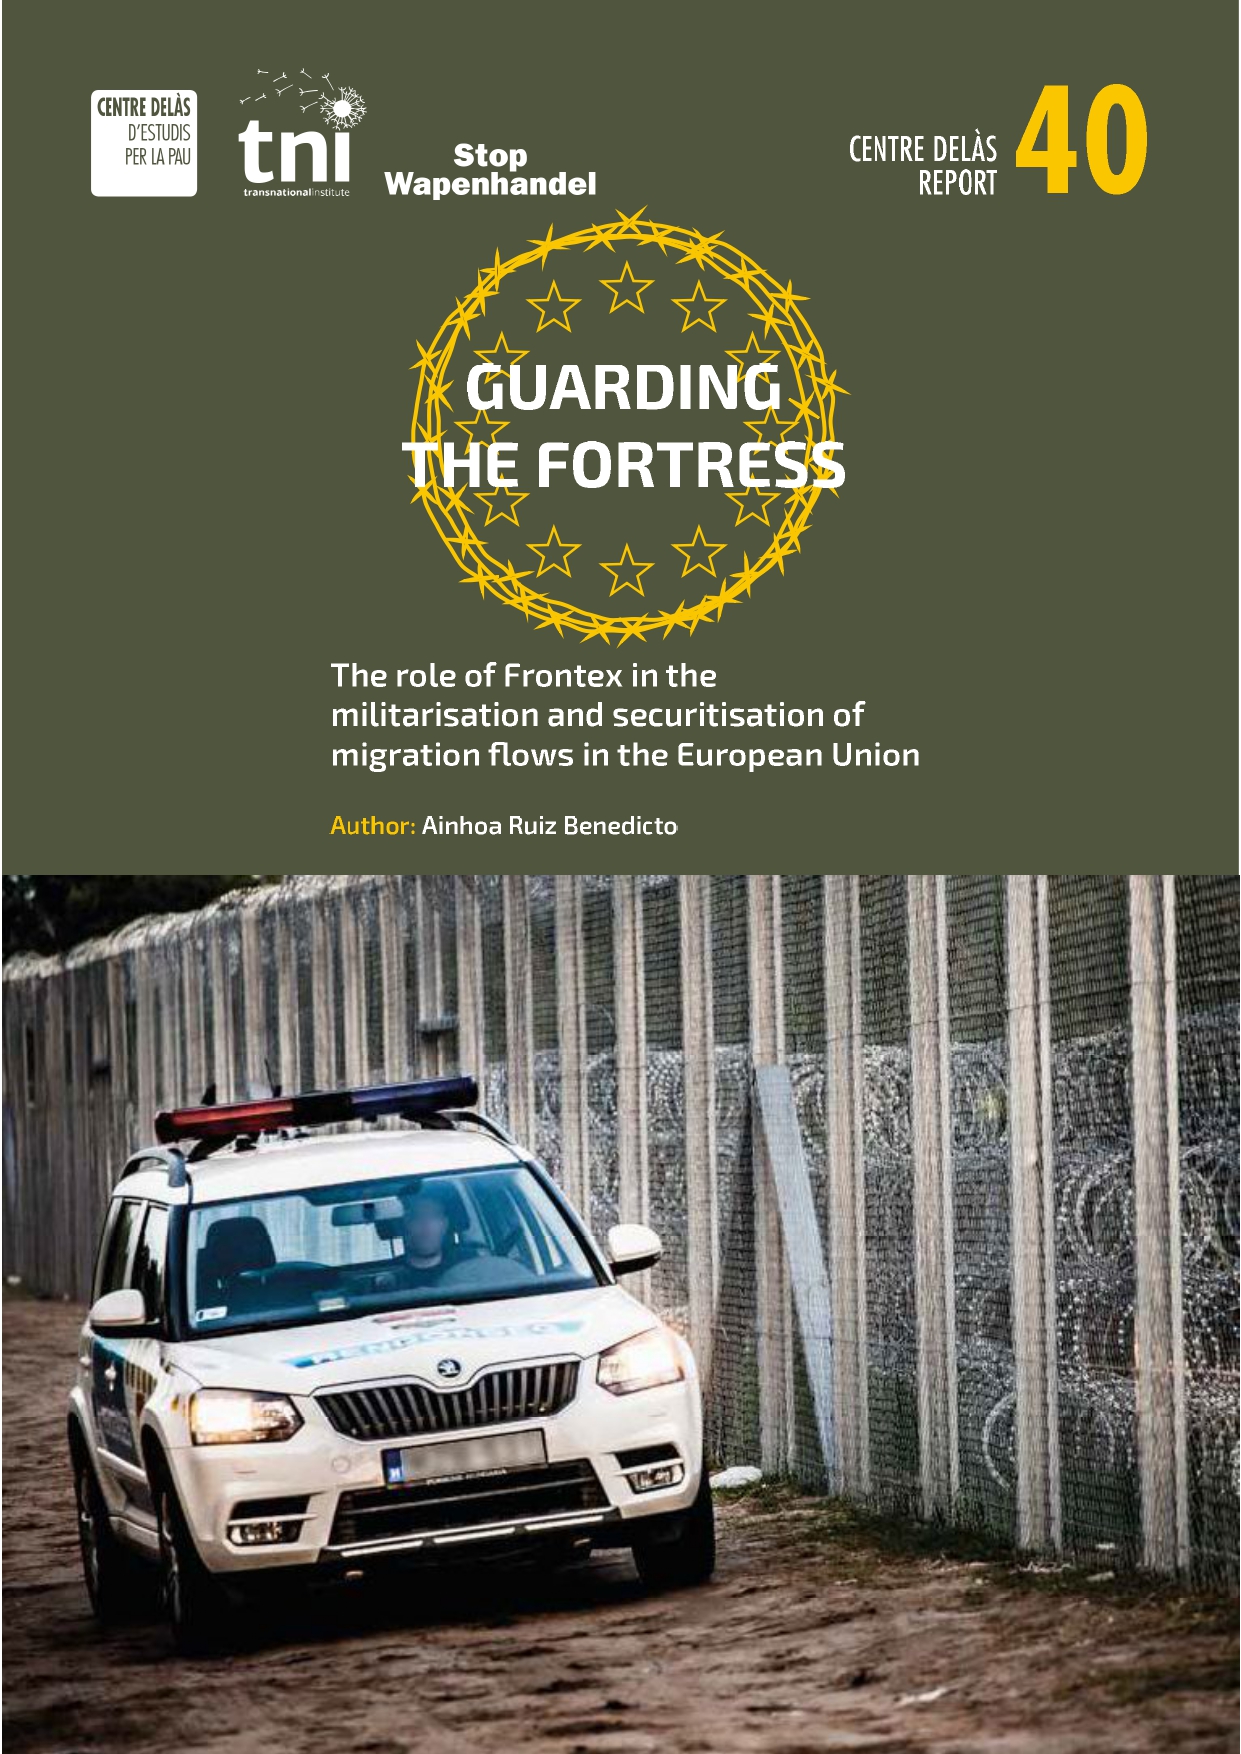 Report 40: Guarding the Fortress. Frontex role in the militarisation and securitisation of migratory flows in the European Union